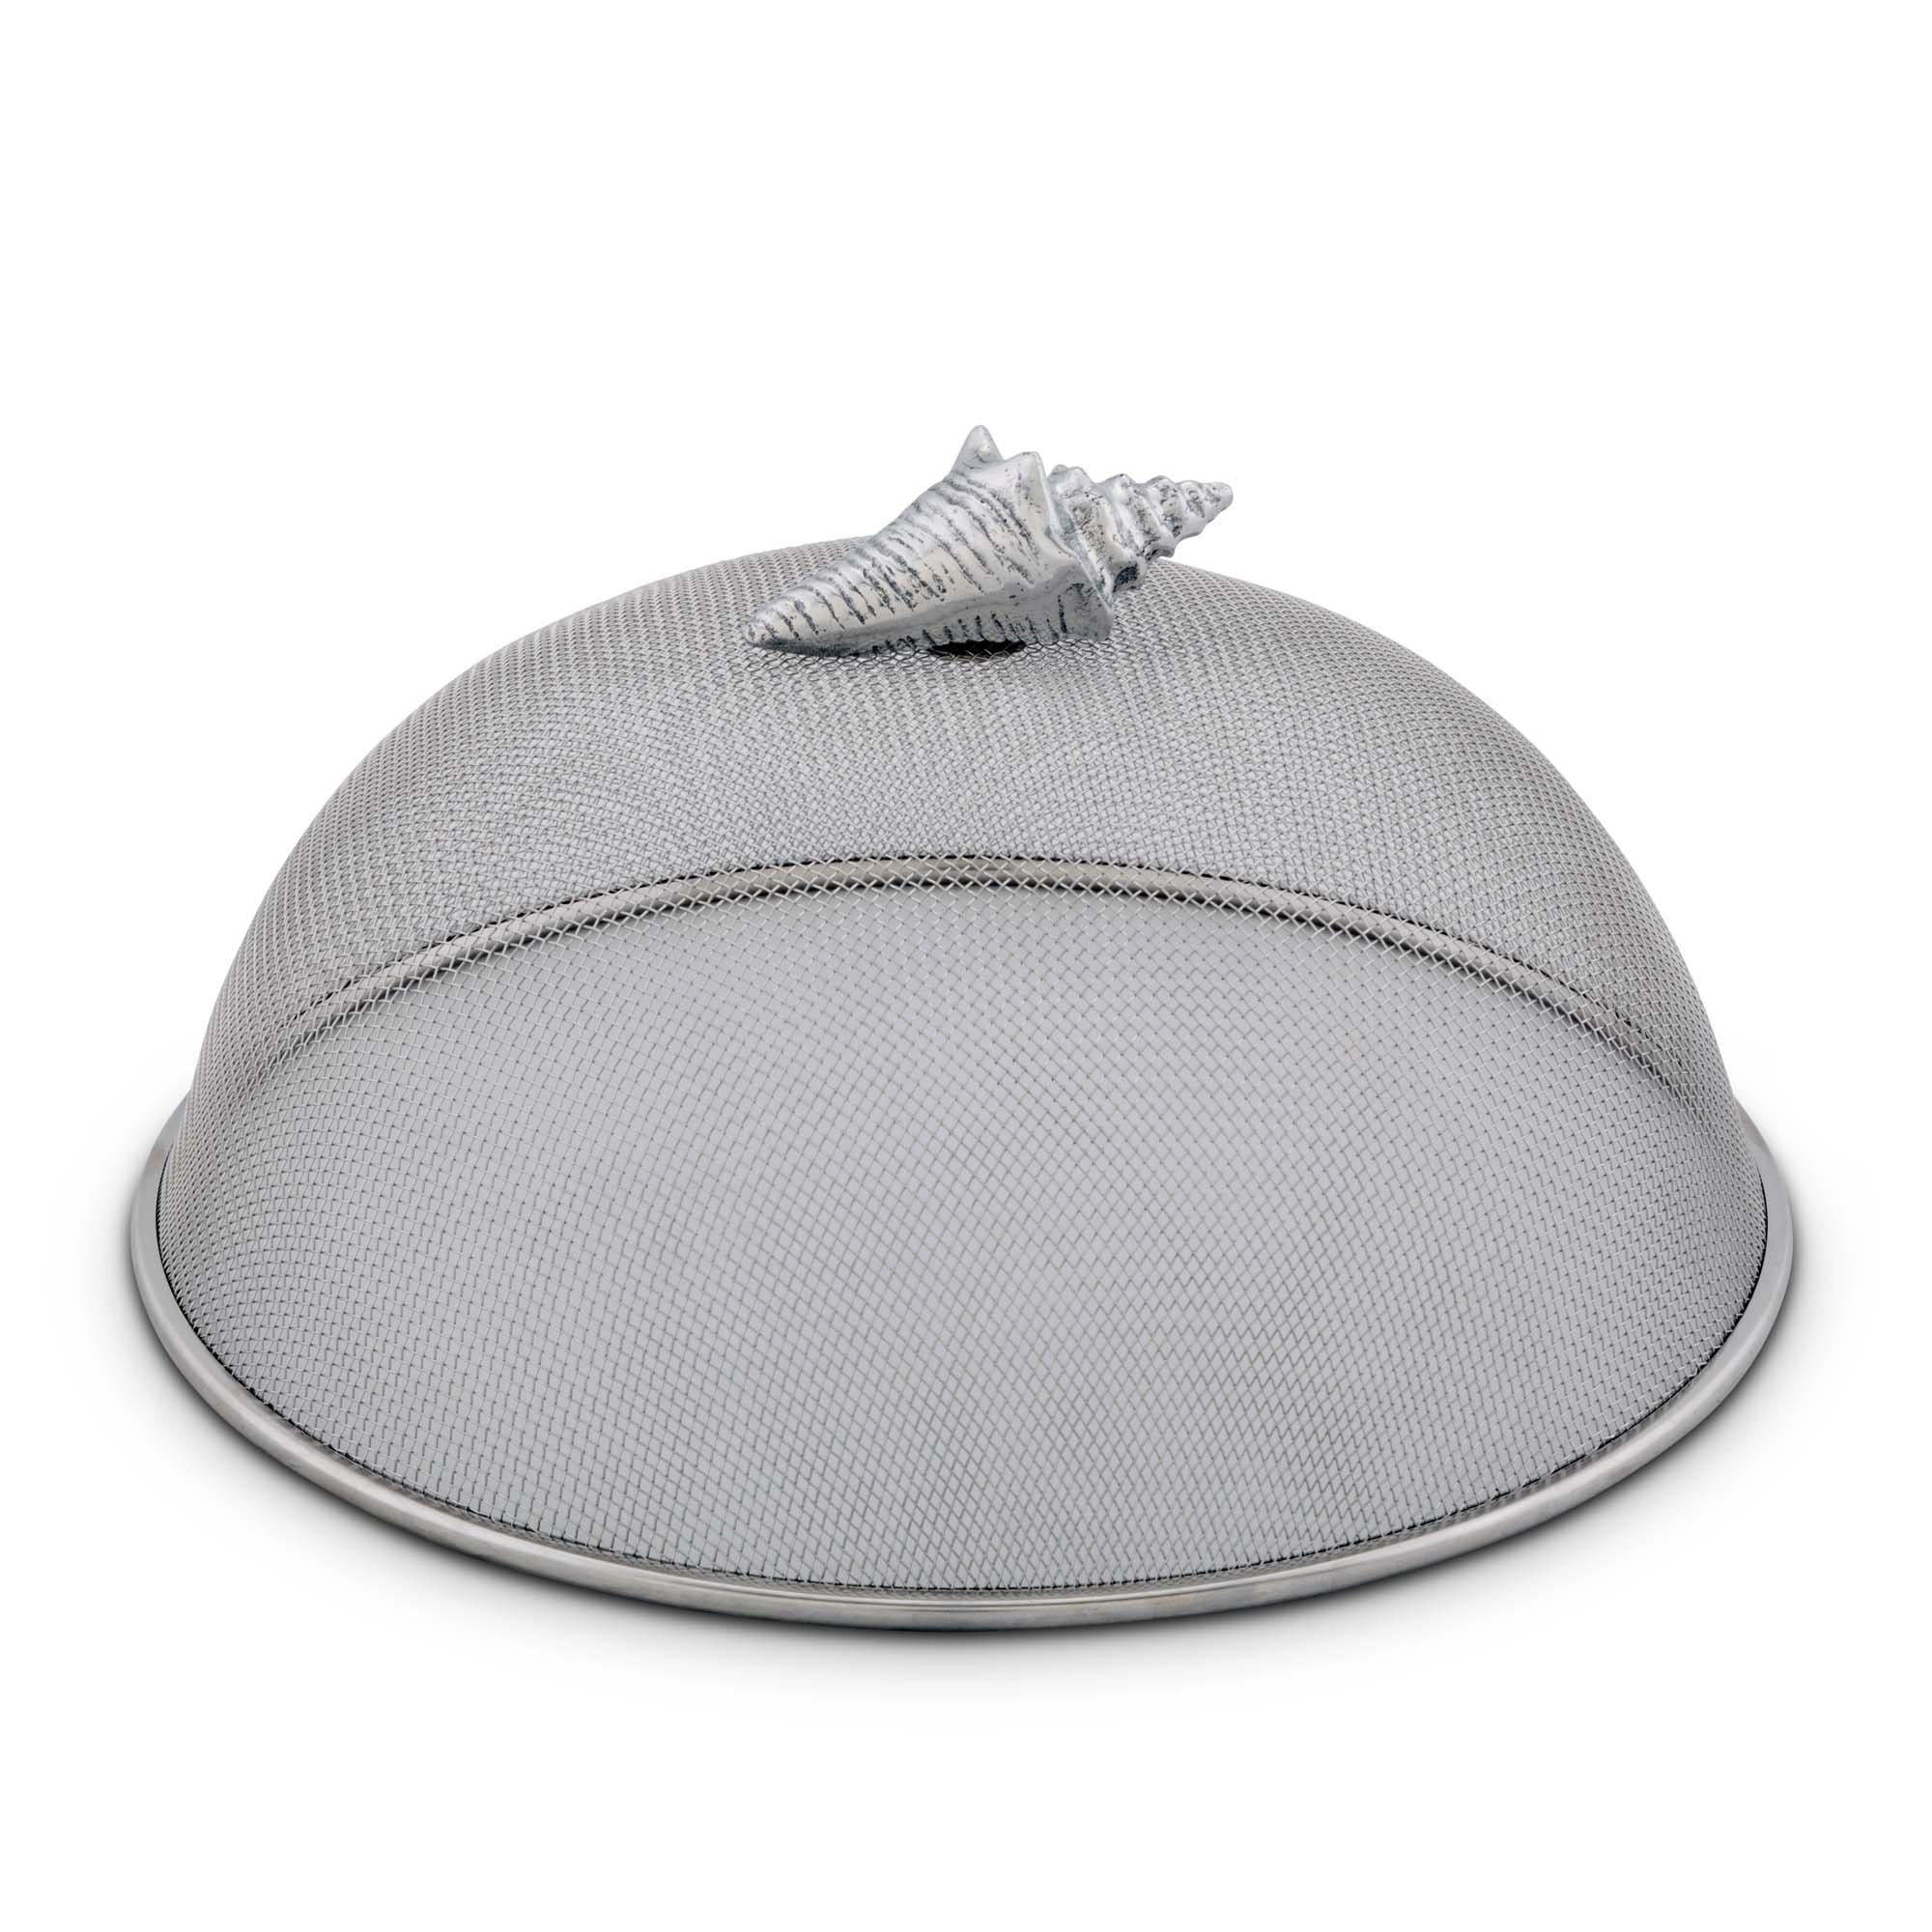 Arthur Court Conch Shell Stainless Mesh Picnic Cover Product Image